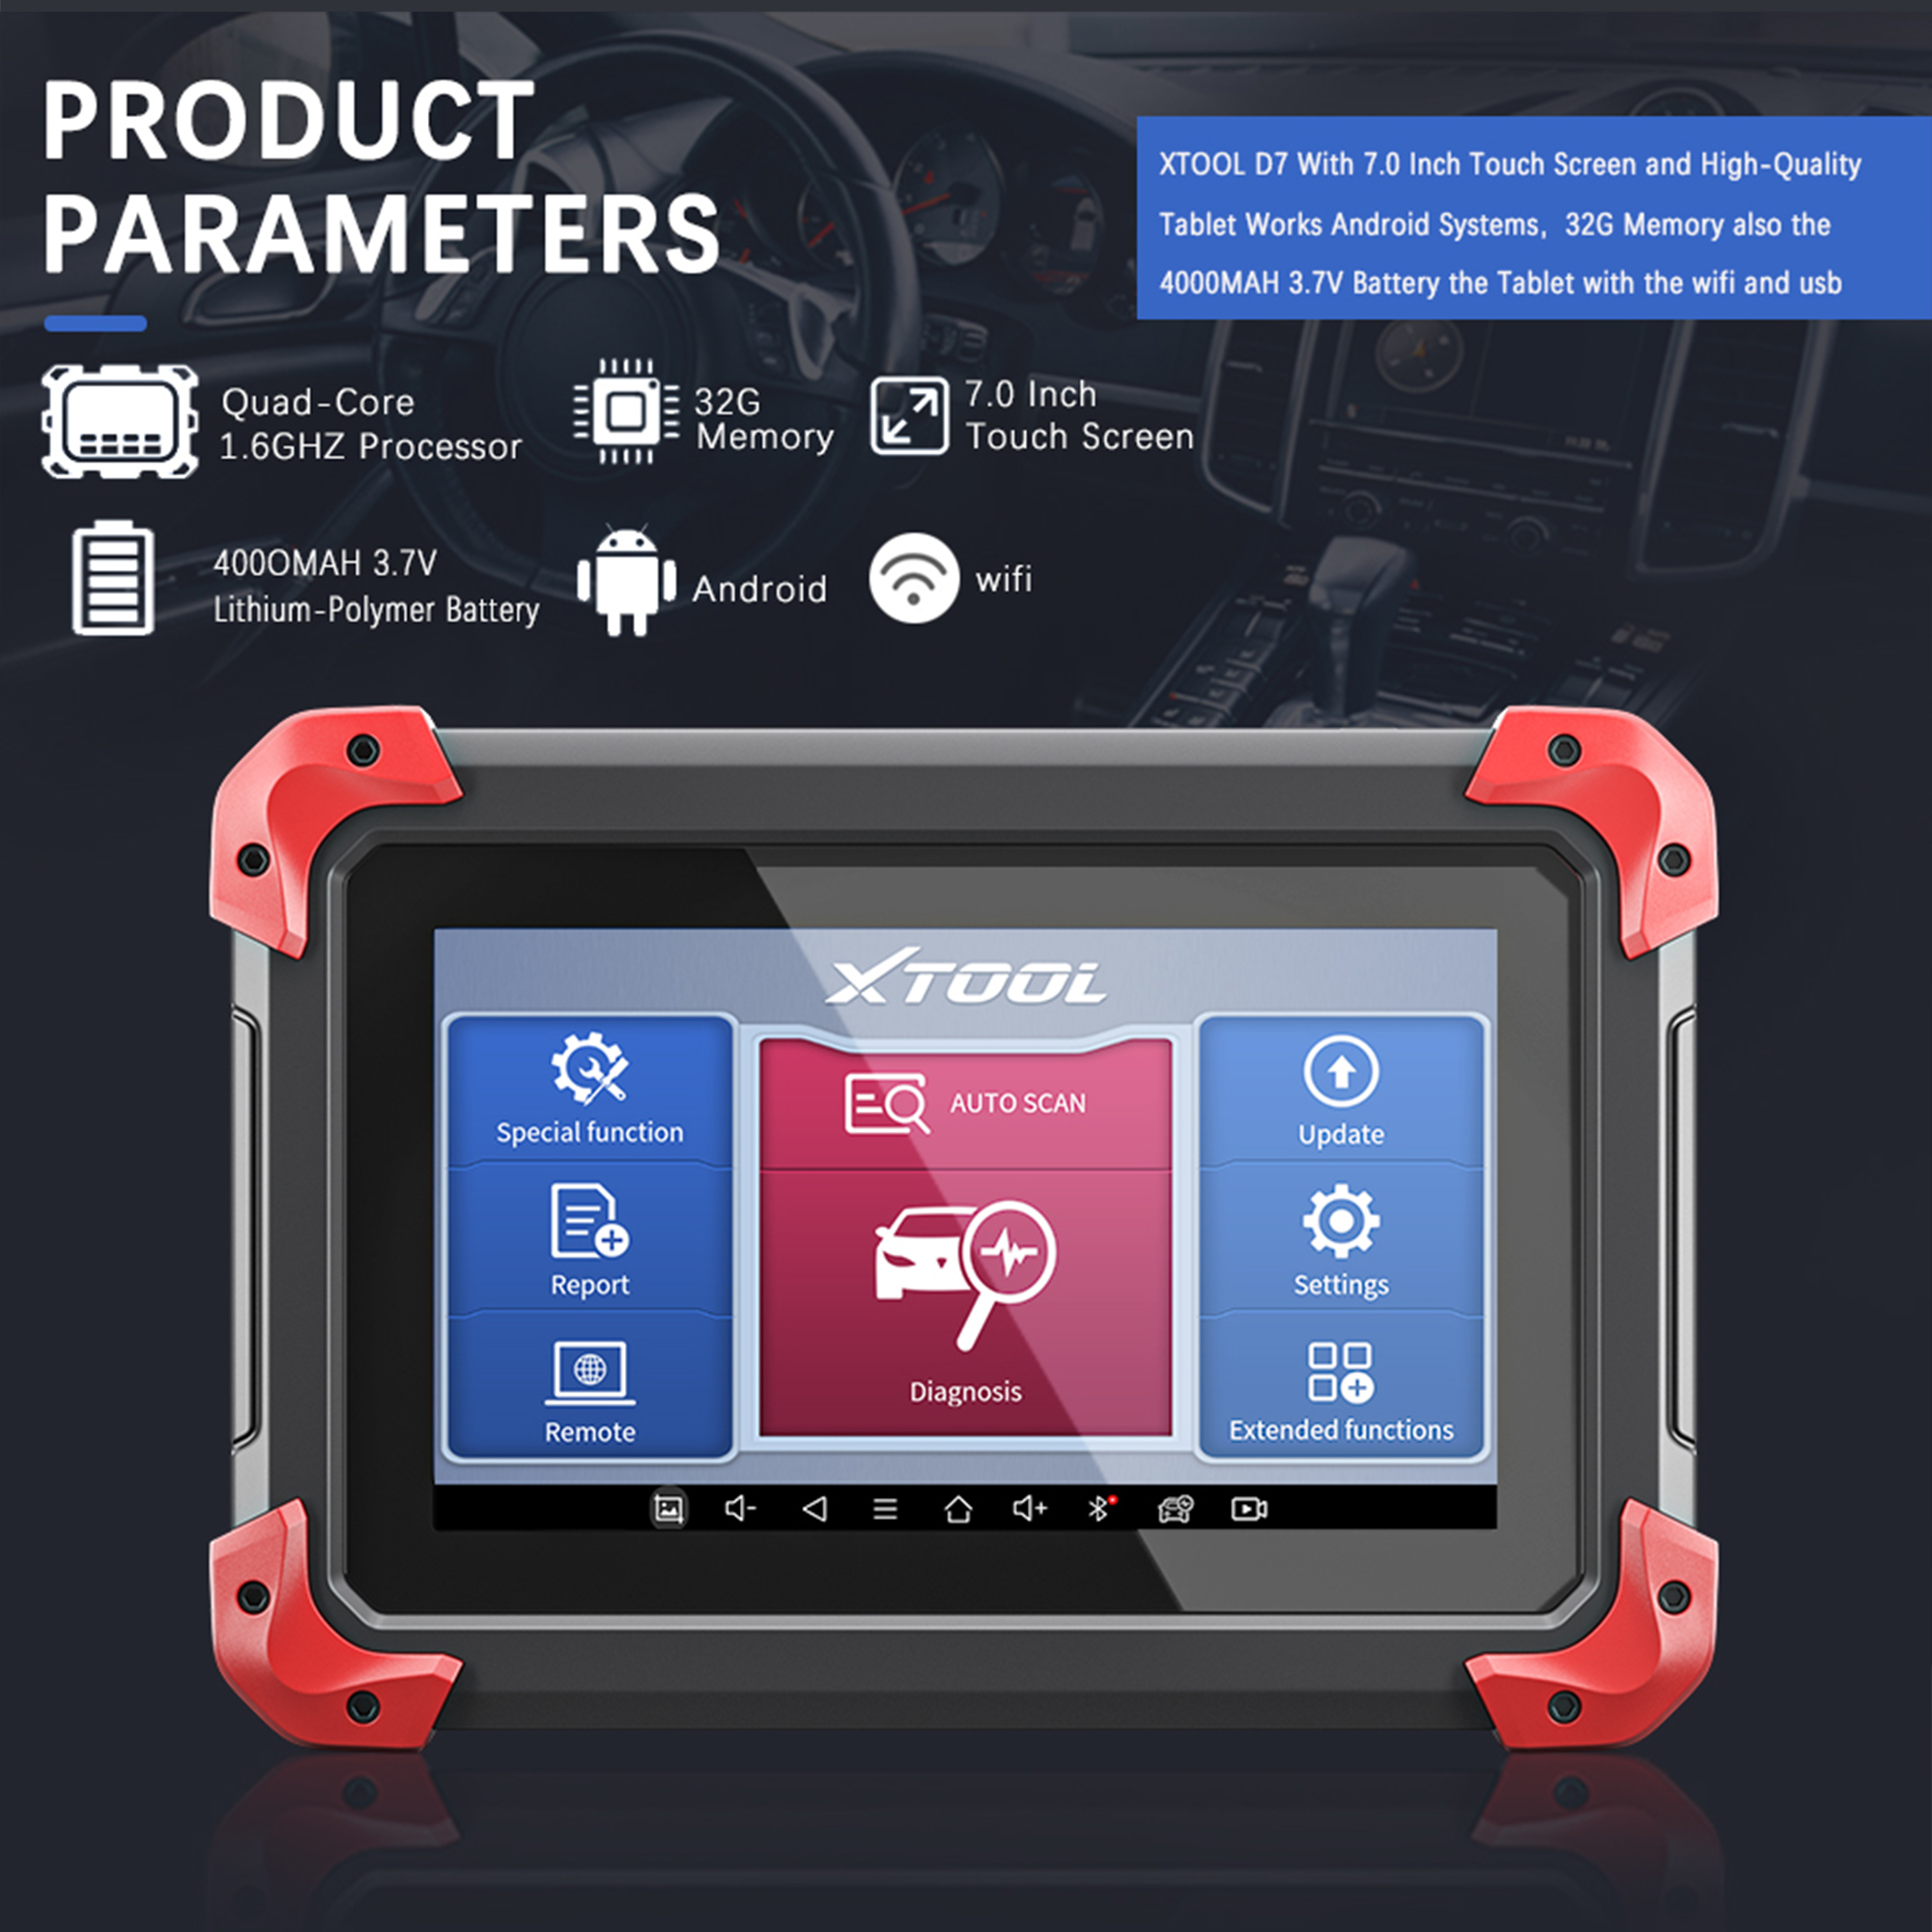 Newest XTOOL D7 Automotive All System Diagnostic Tool